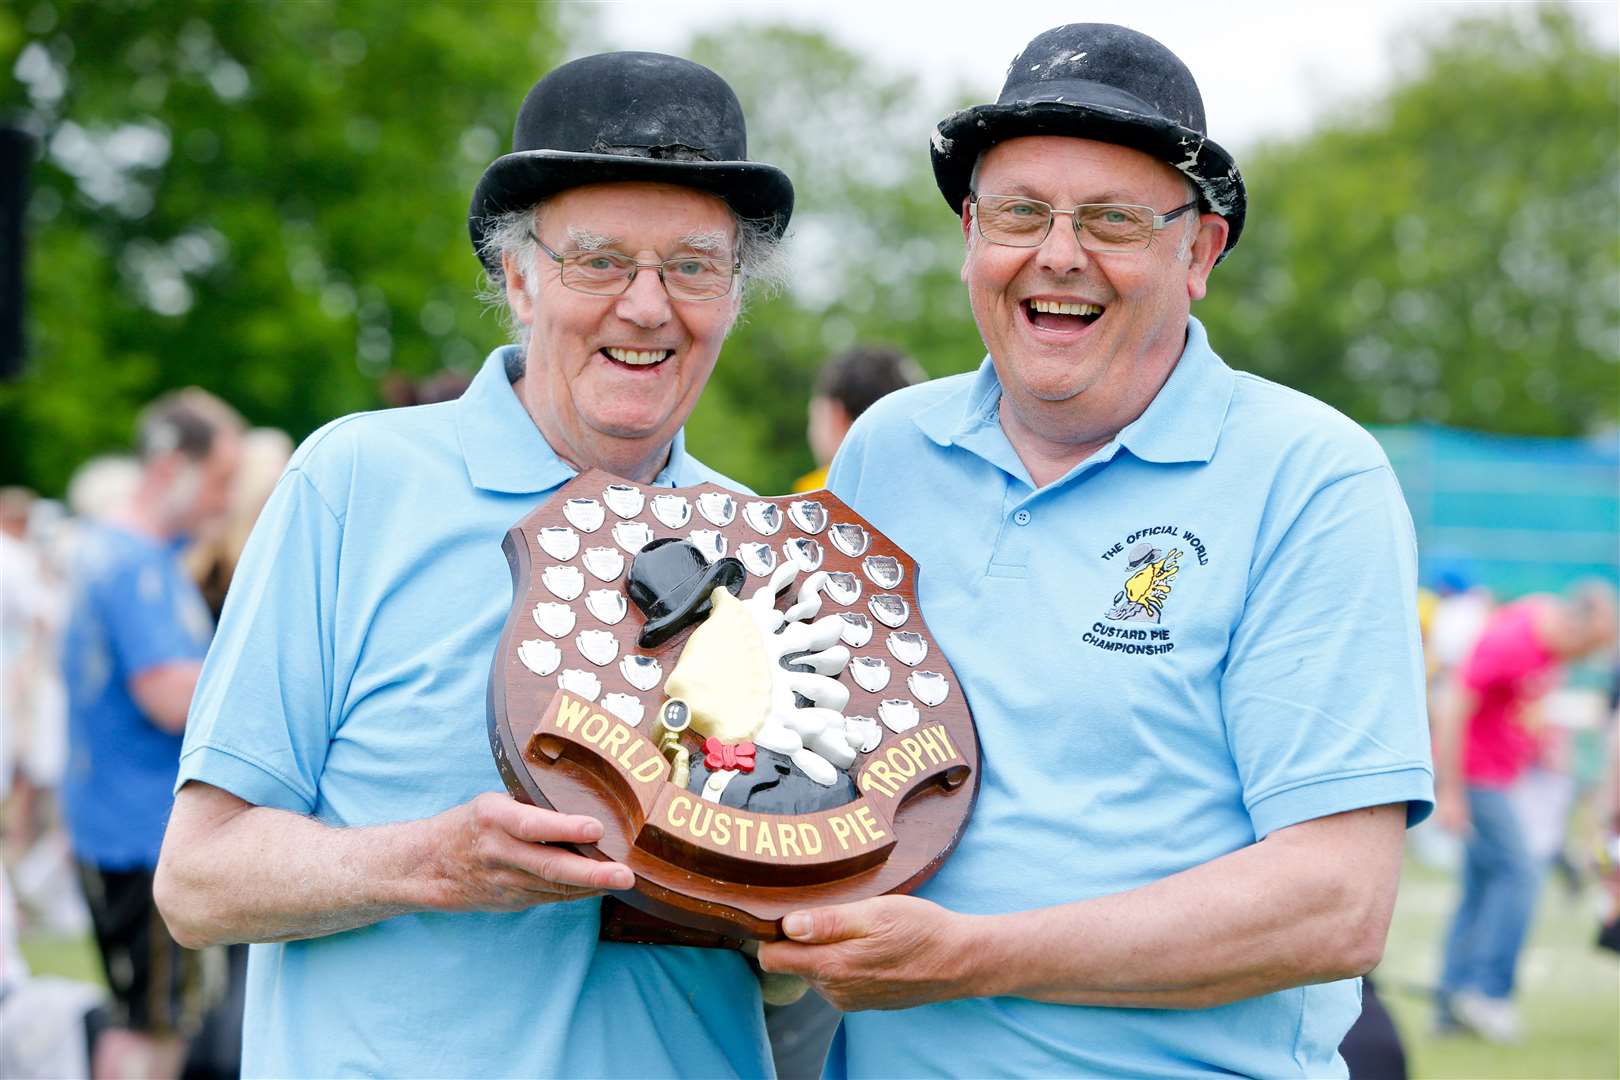 Brian Mortimer (left) and friend Mike FitzGerlad with the Custard Pie Trophy